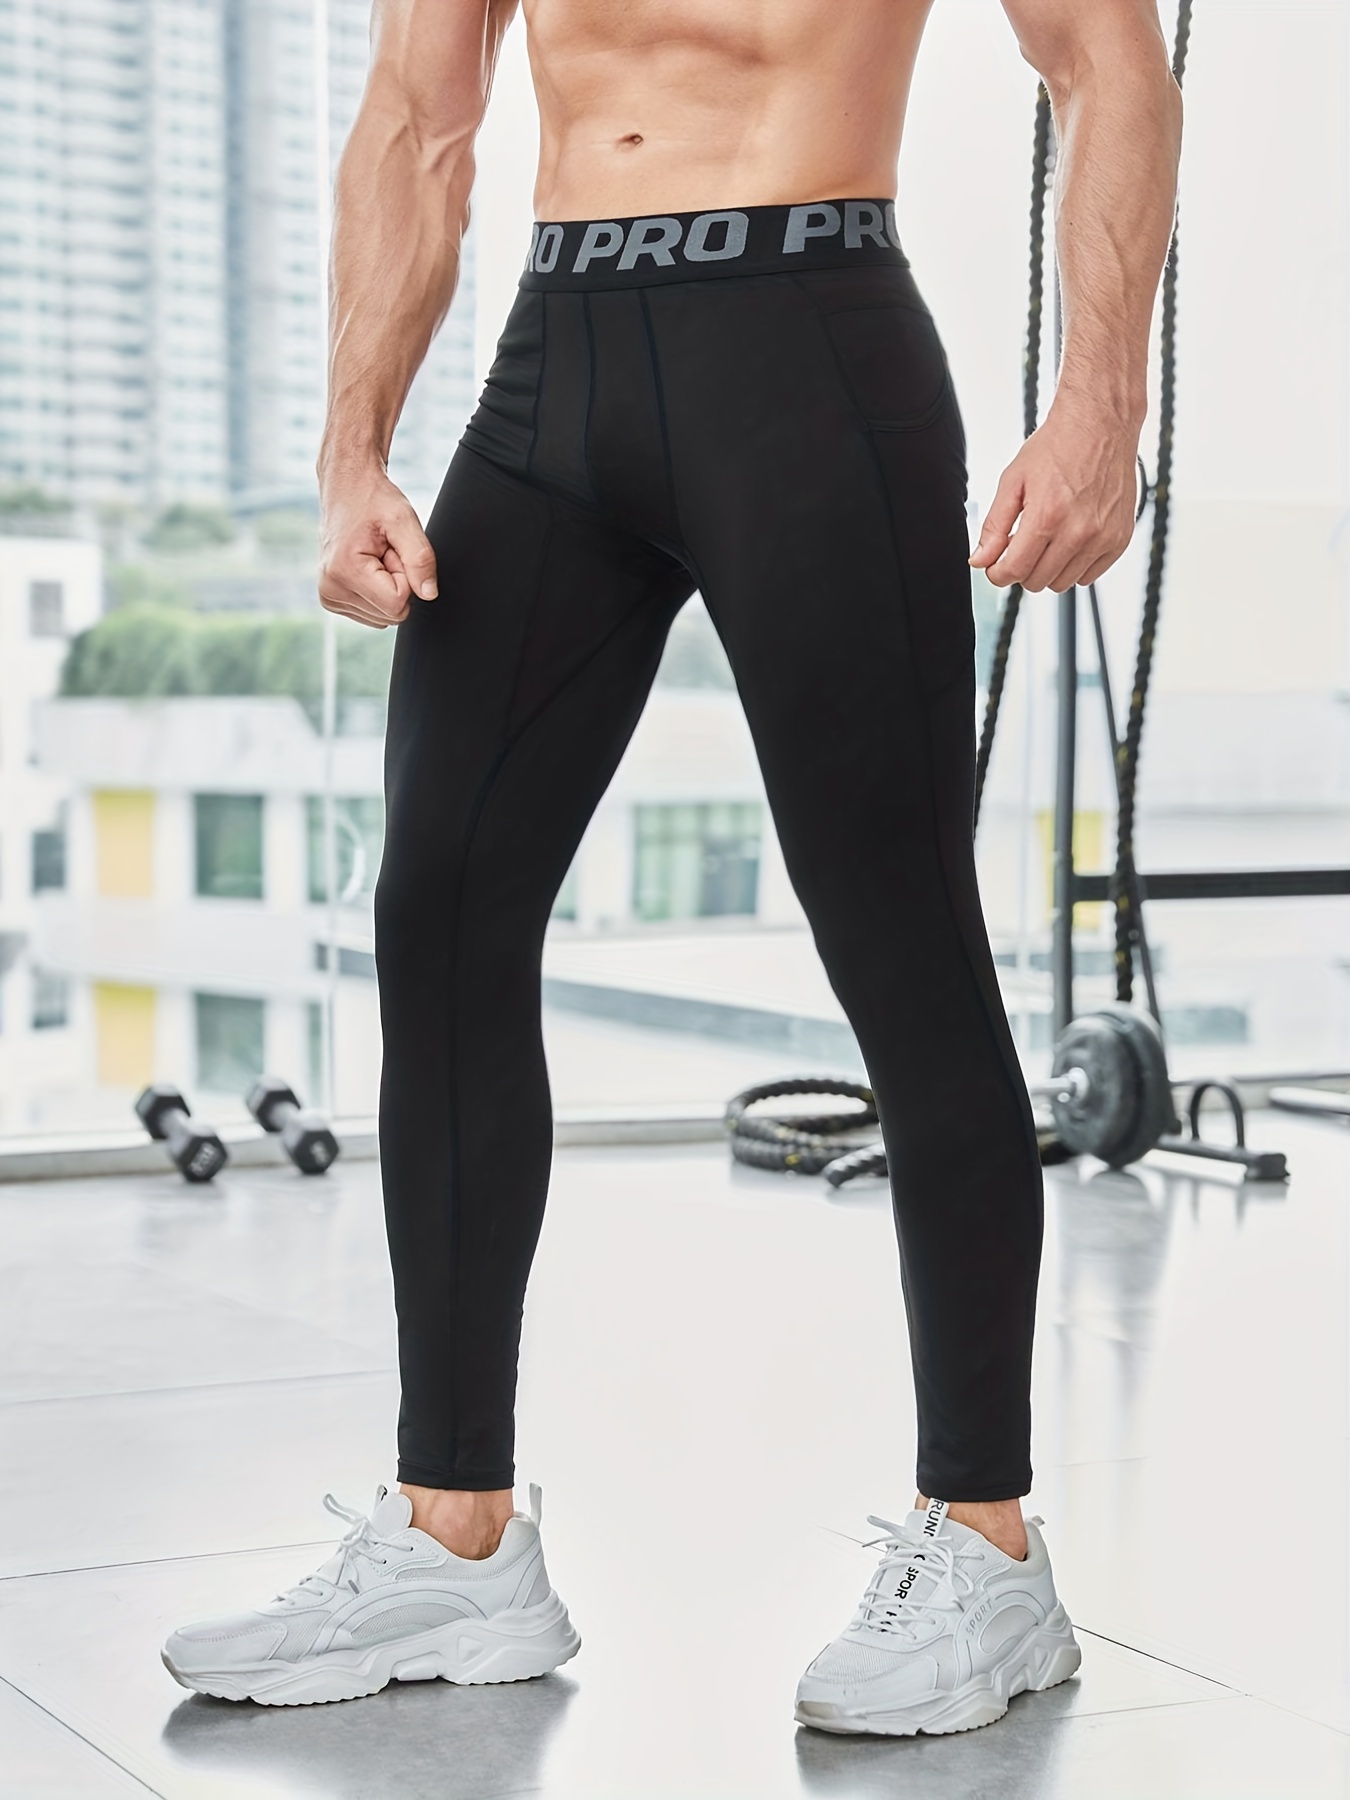 Tight Pants For Men, Sports Base Layer, Running Fitness Professional  Training Leggings, Quick Drying Compression High Elasticity Basketball  Leggings